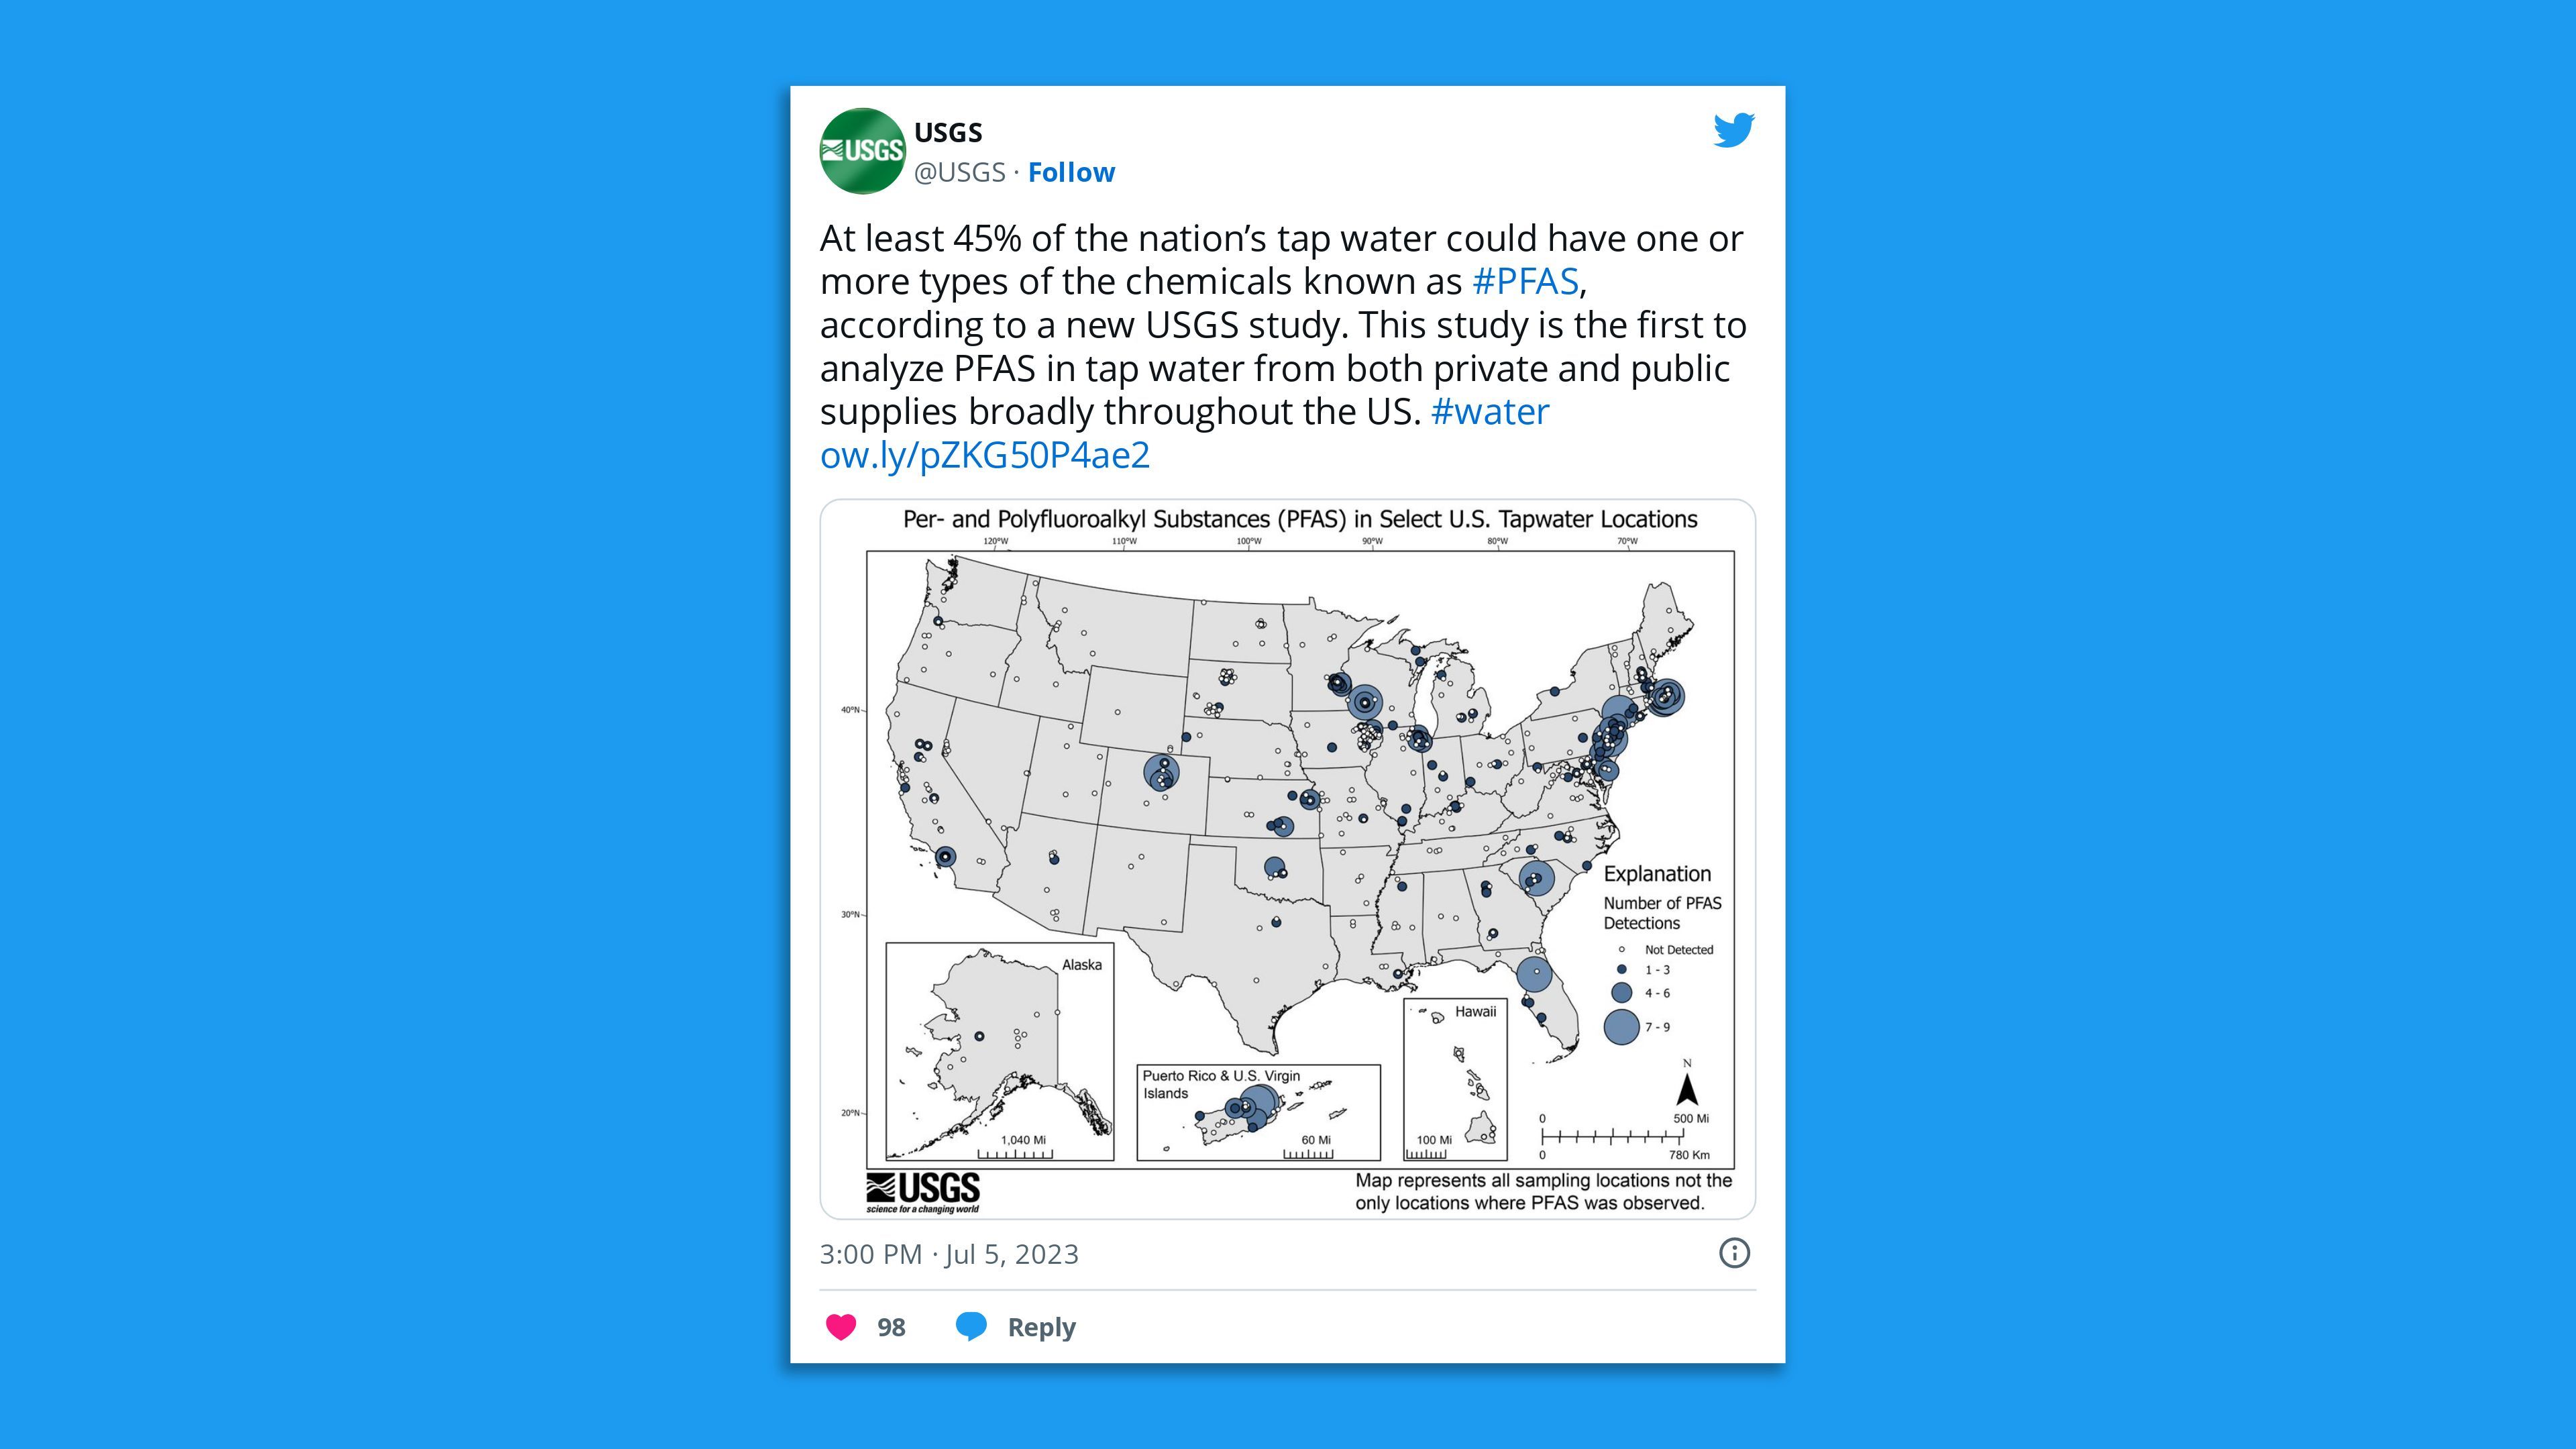 A screenshot of a USGS tweet saying: "At least 45% of the nation’s tap water could have one or more types of the chemicals known as #PFAS, according to a new USGS study. This study is the first to analyze PFAS in tap water from both private and public supplies broadly throughout the US"